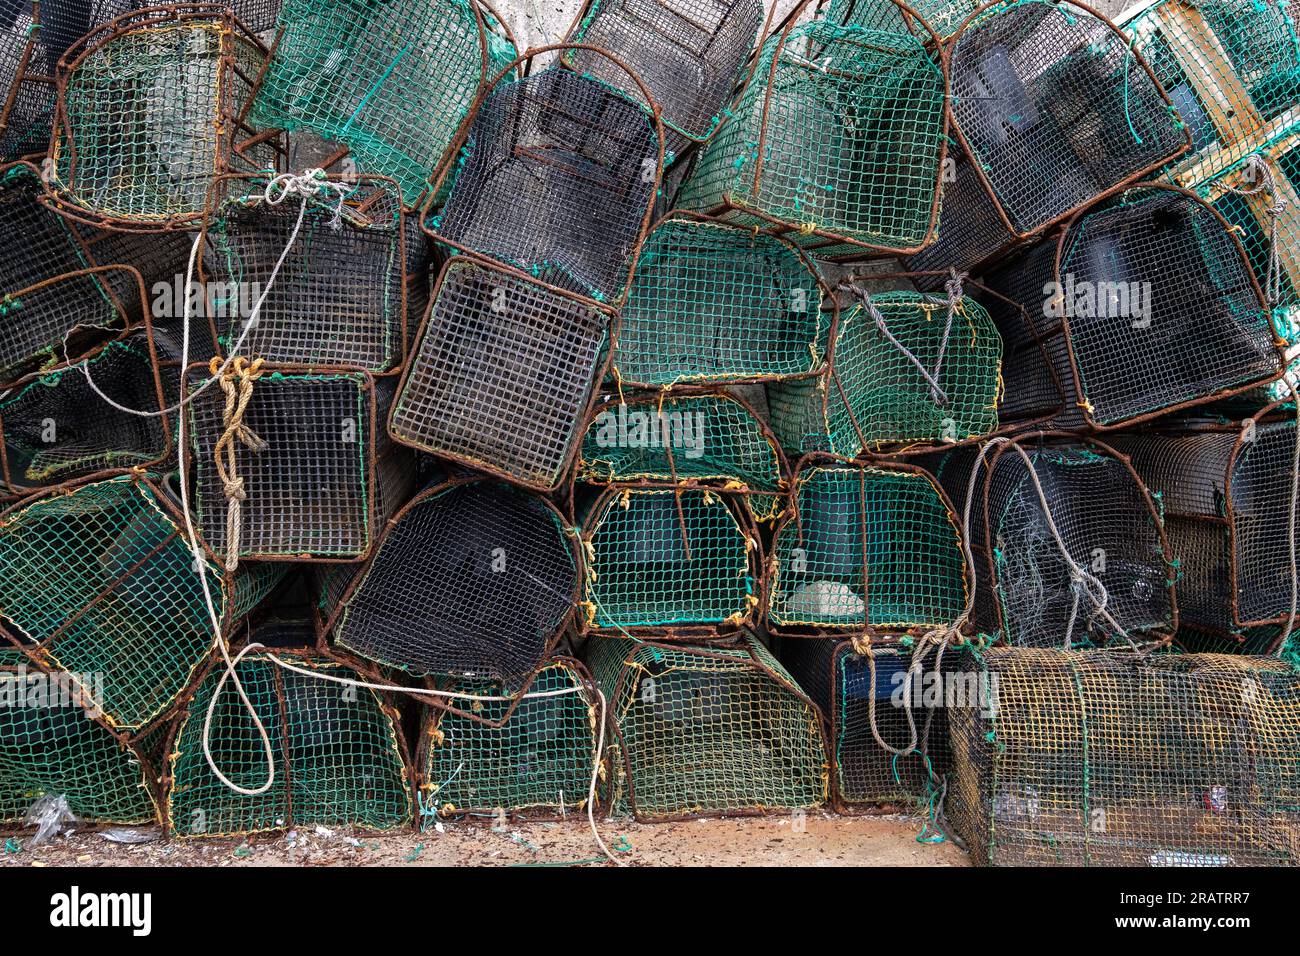 https://c8.alamy.com/comp/2RATRR7/fishing-traps-in-asturias-spain-capture-of-octopus-and-shellfish-stacked-in-the-fishing-port-2RATRR7.jpg